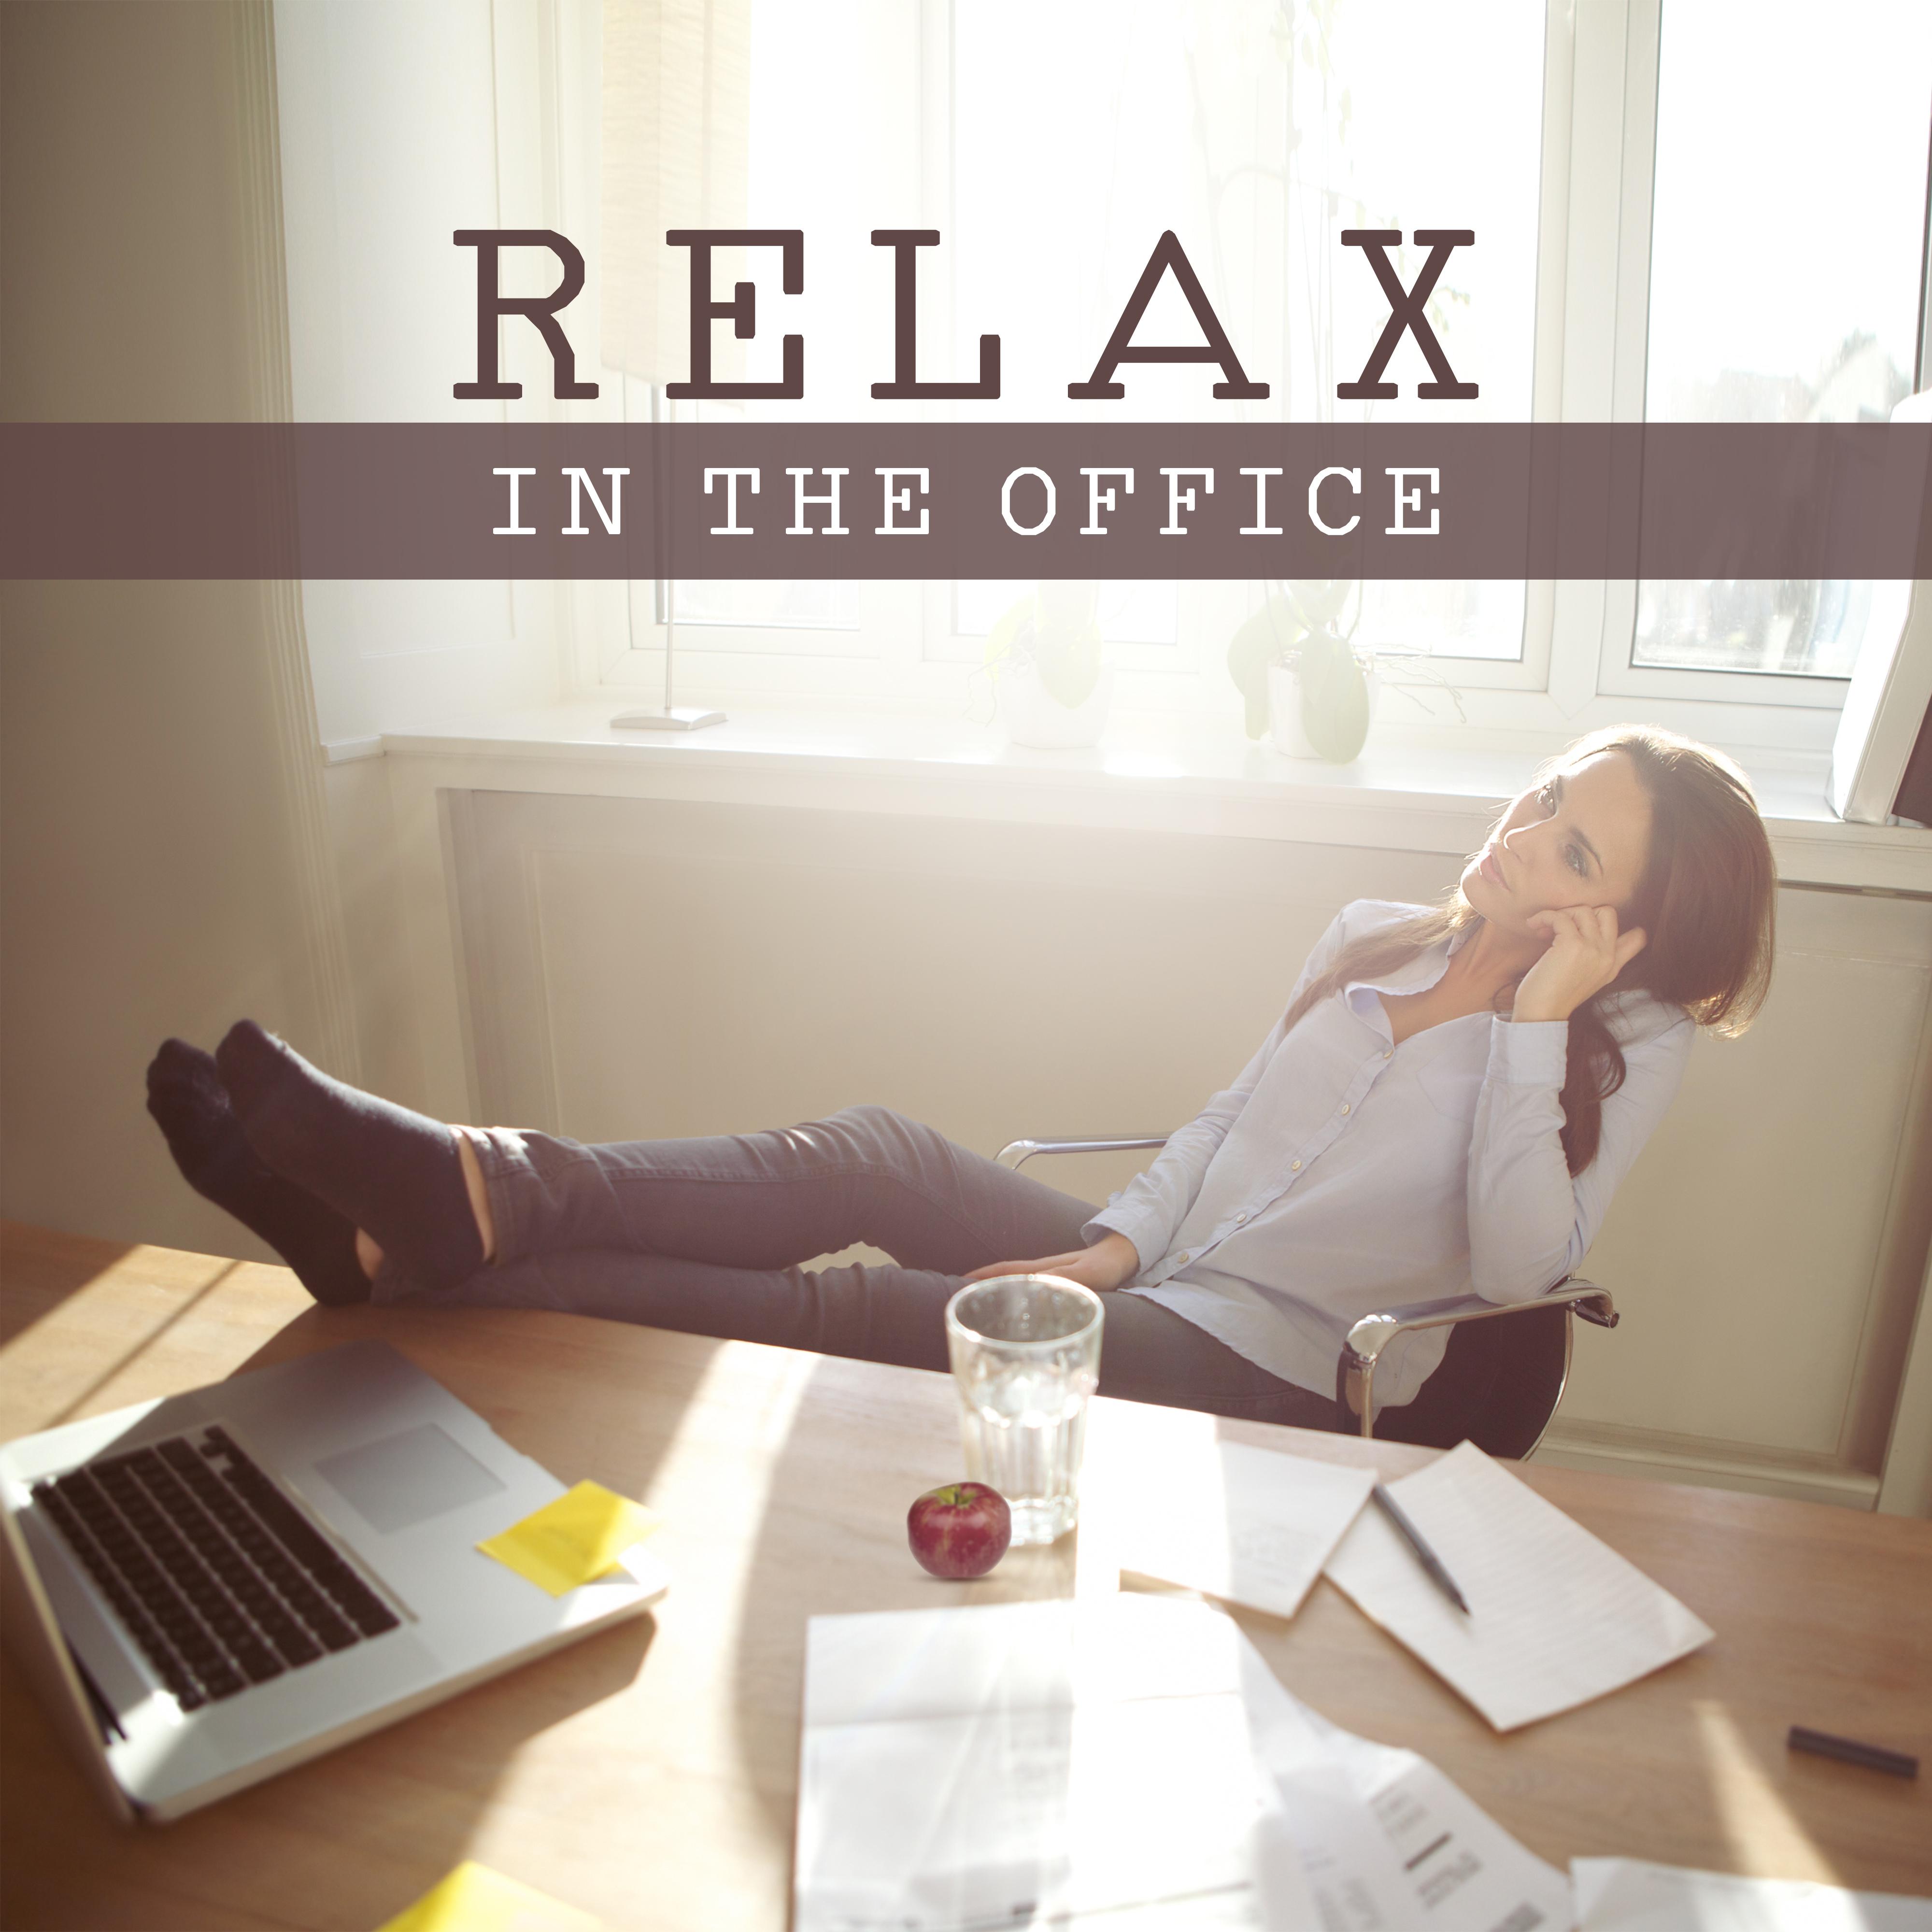 Relax in the Office  Relaxing Music, New Age 2017 for Rest, Have a Break at Work, Relax, Feel Fresh Power